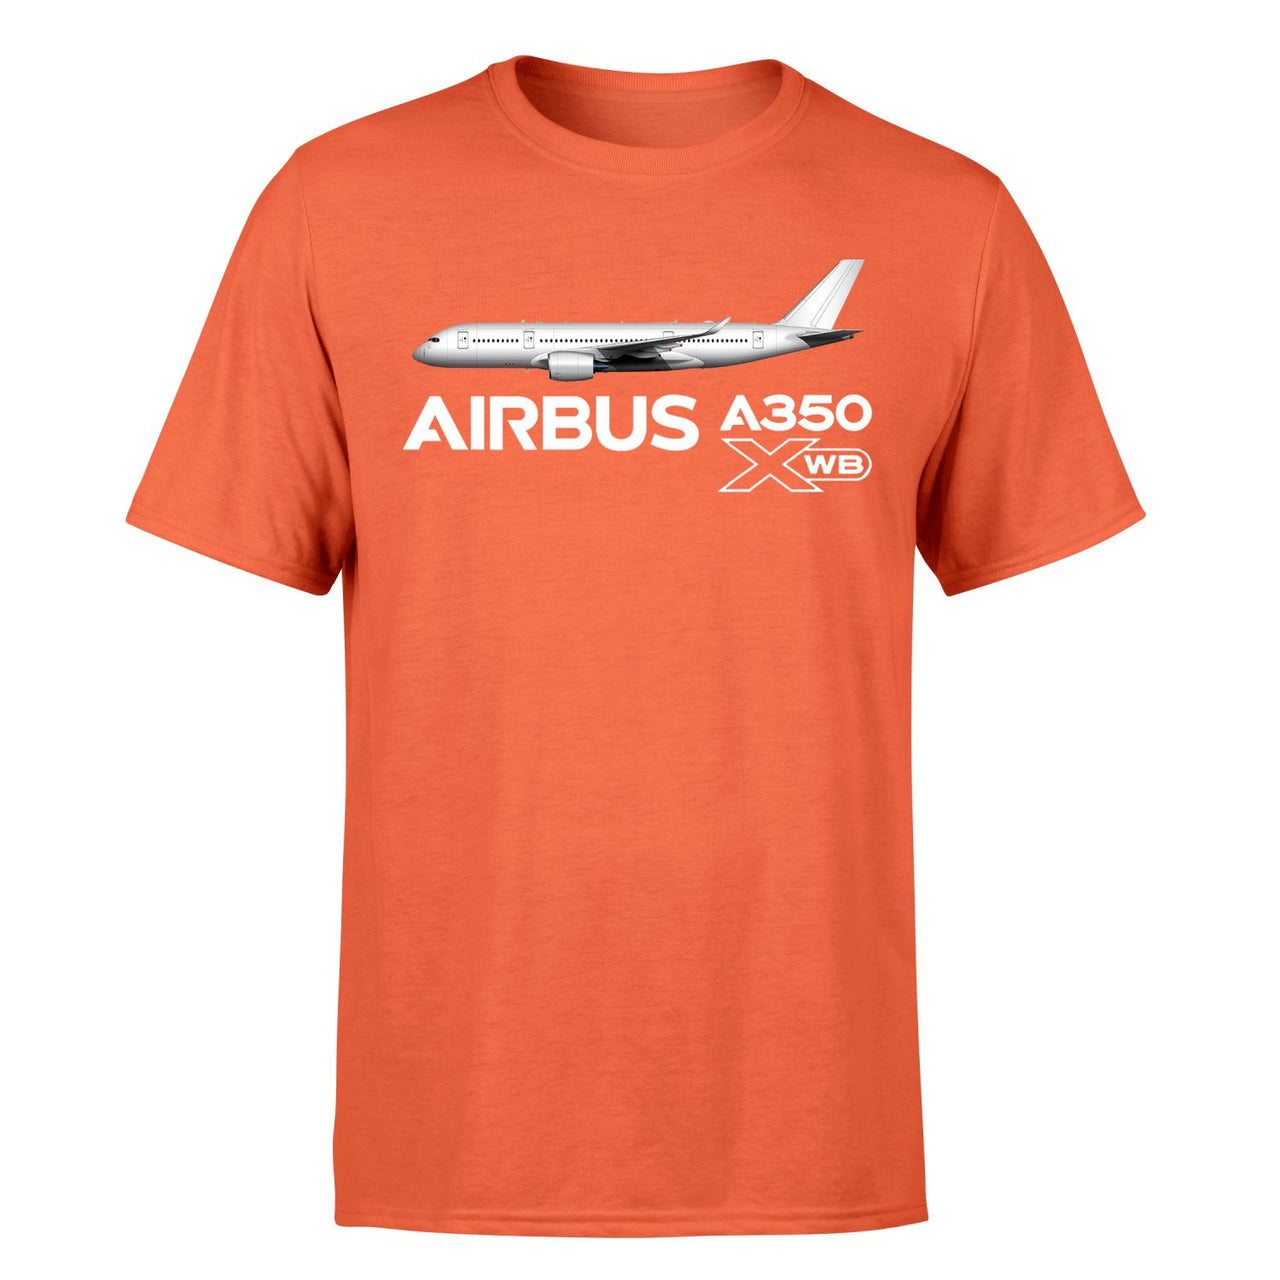 The Airbus A350 WXB Designed T-Shirts